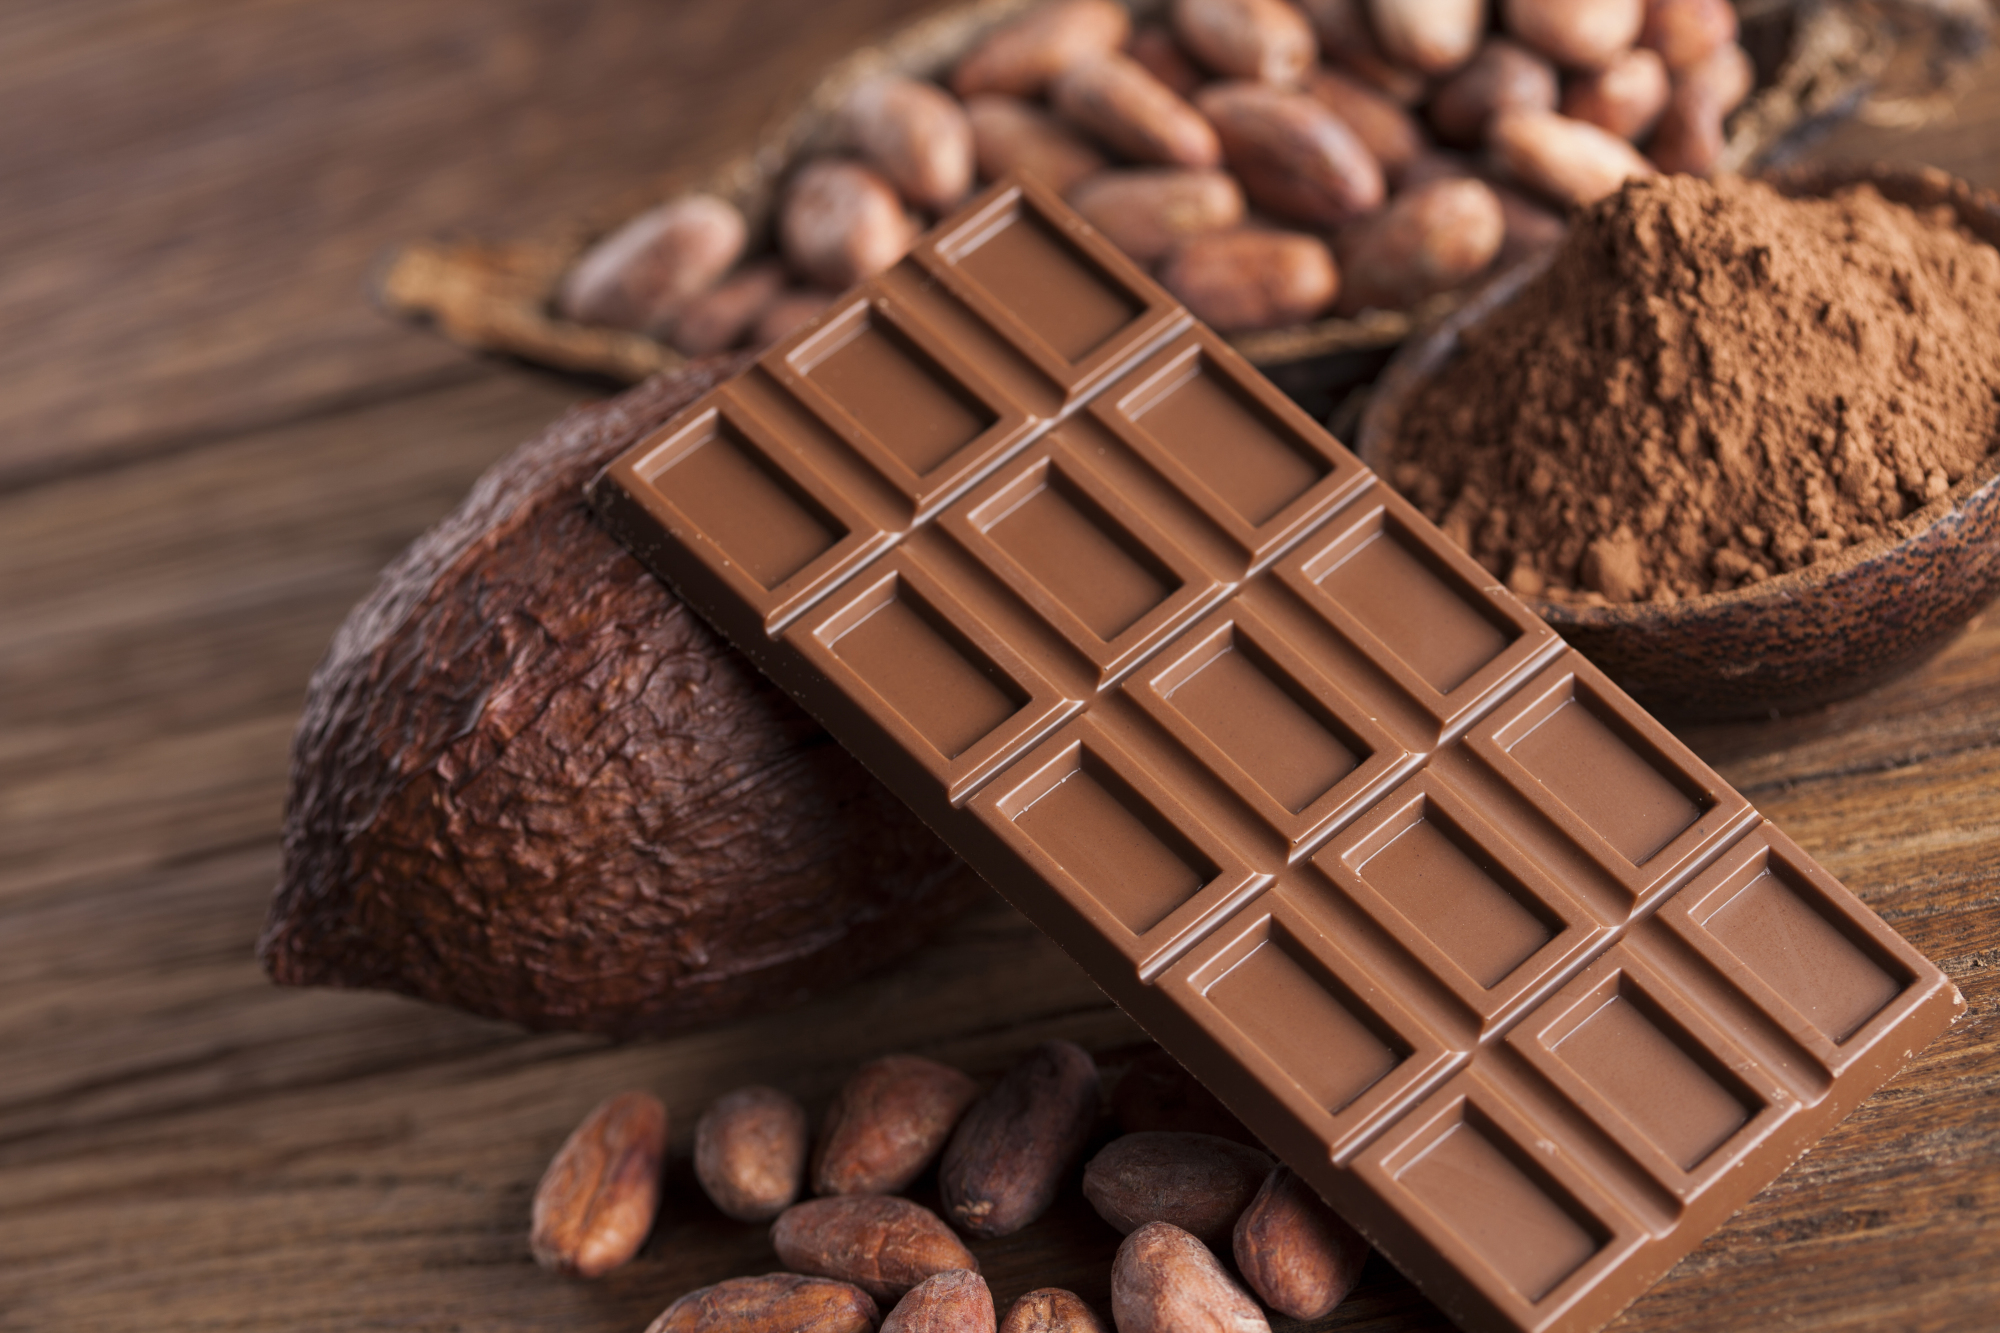 Is chocolate good for your brain? The government said Thursday that a report claiming eating chocolate could expand the cerebral cortex needs more evidence. | GETTY IMAGES